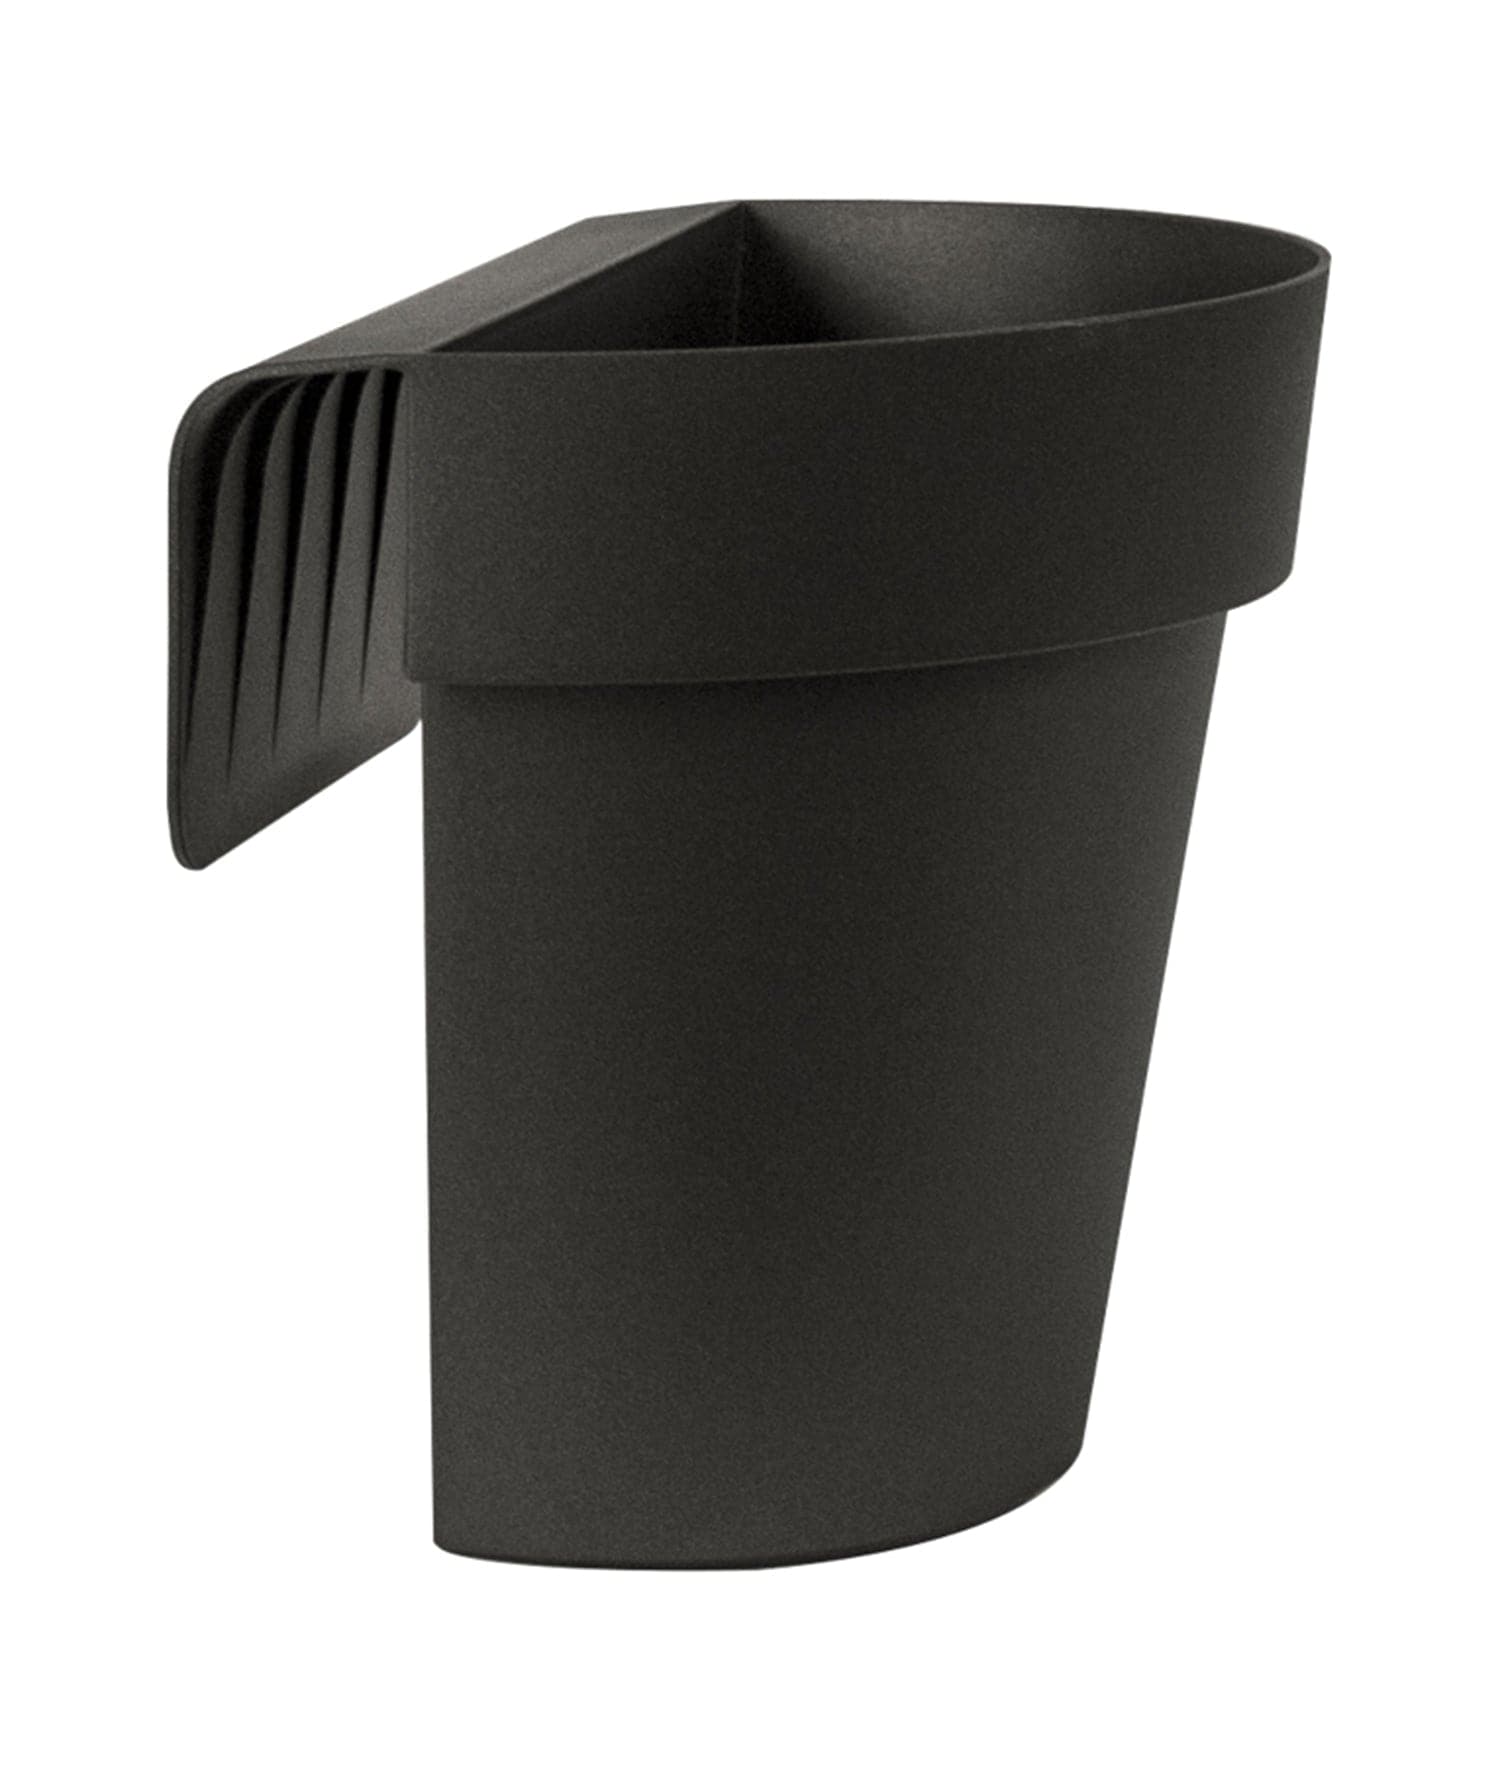 INJECTION UP VASE WITH RESERVE CM 25X20 H 23 ANTHRACITE